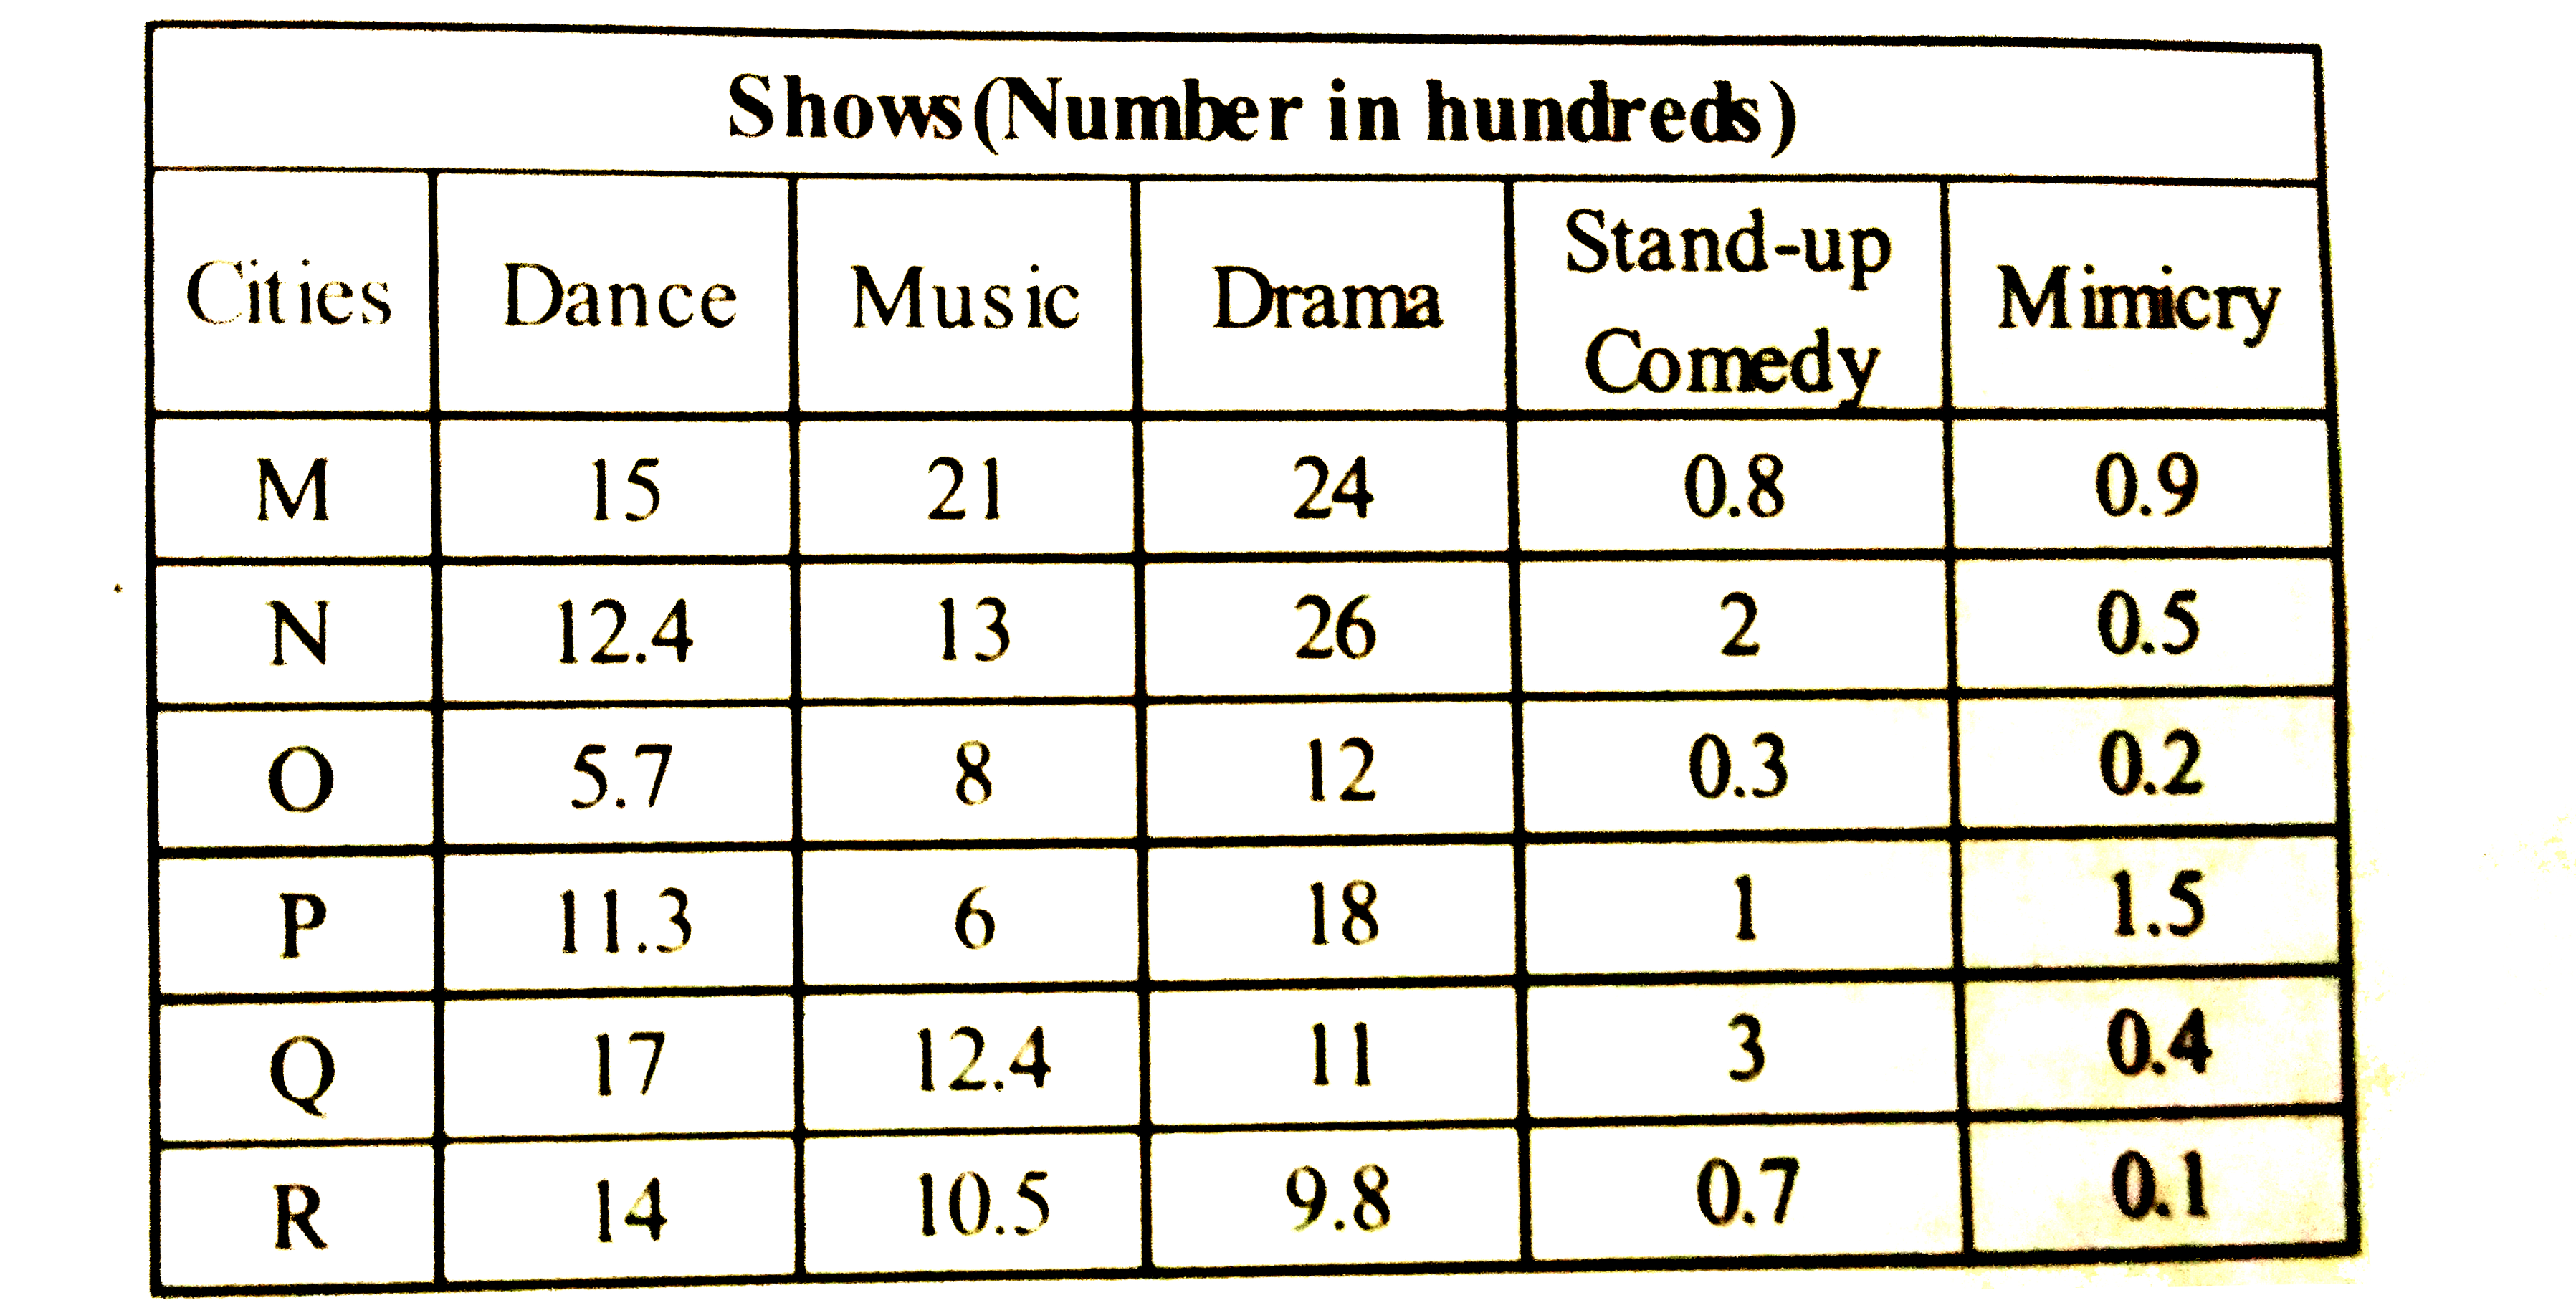 What is the ratio of the numer of dance show held in city N to the number of drama shos held in city R ?